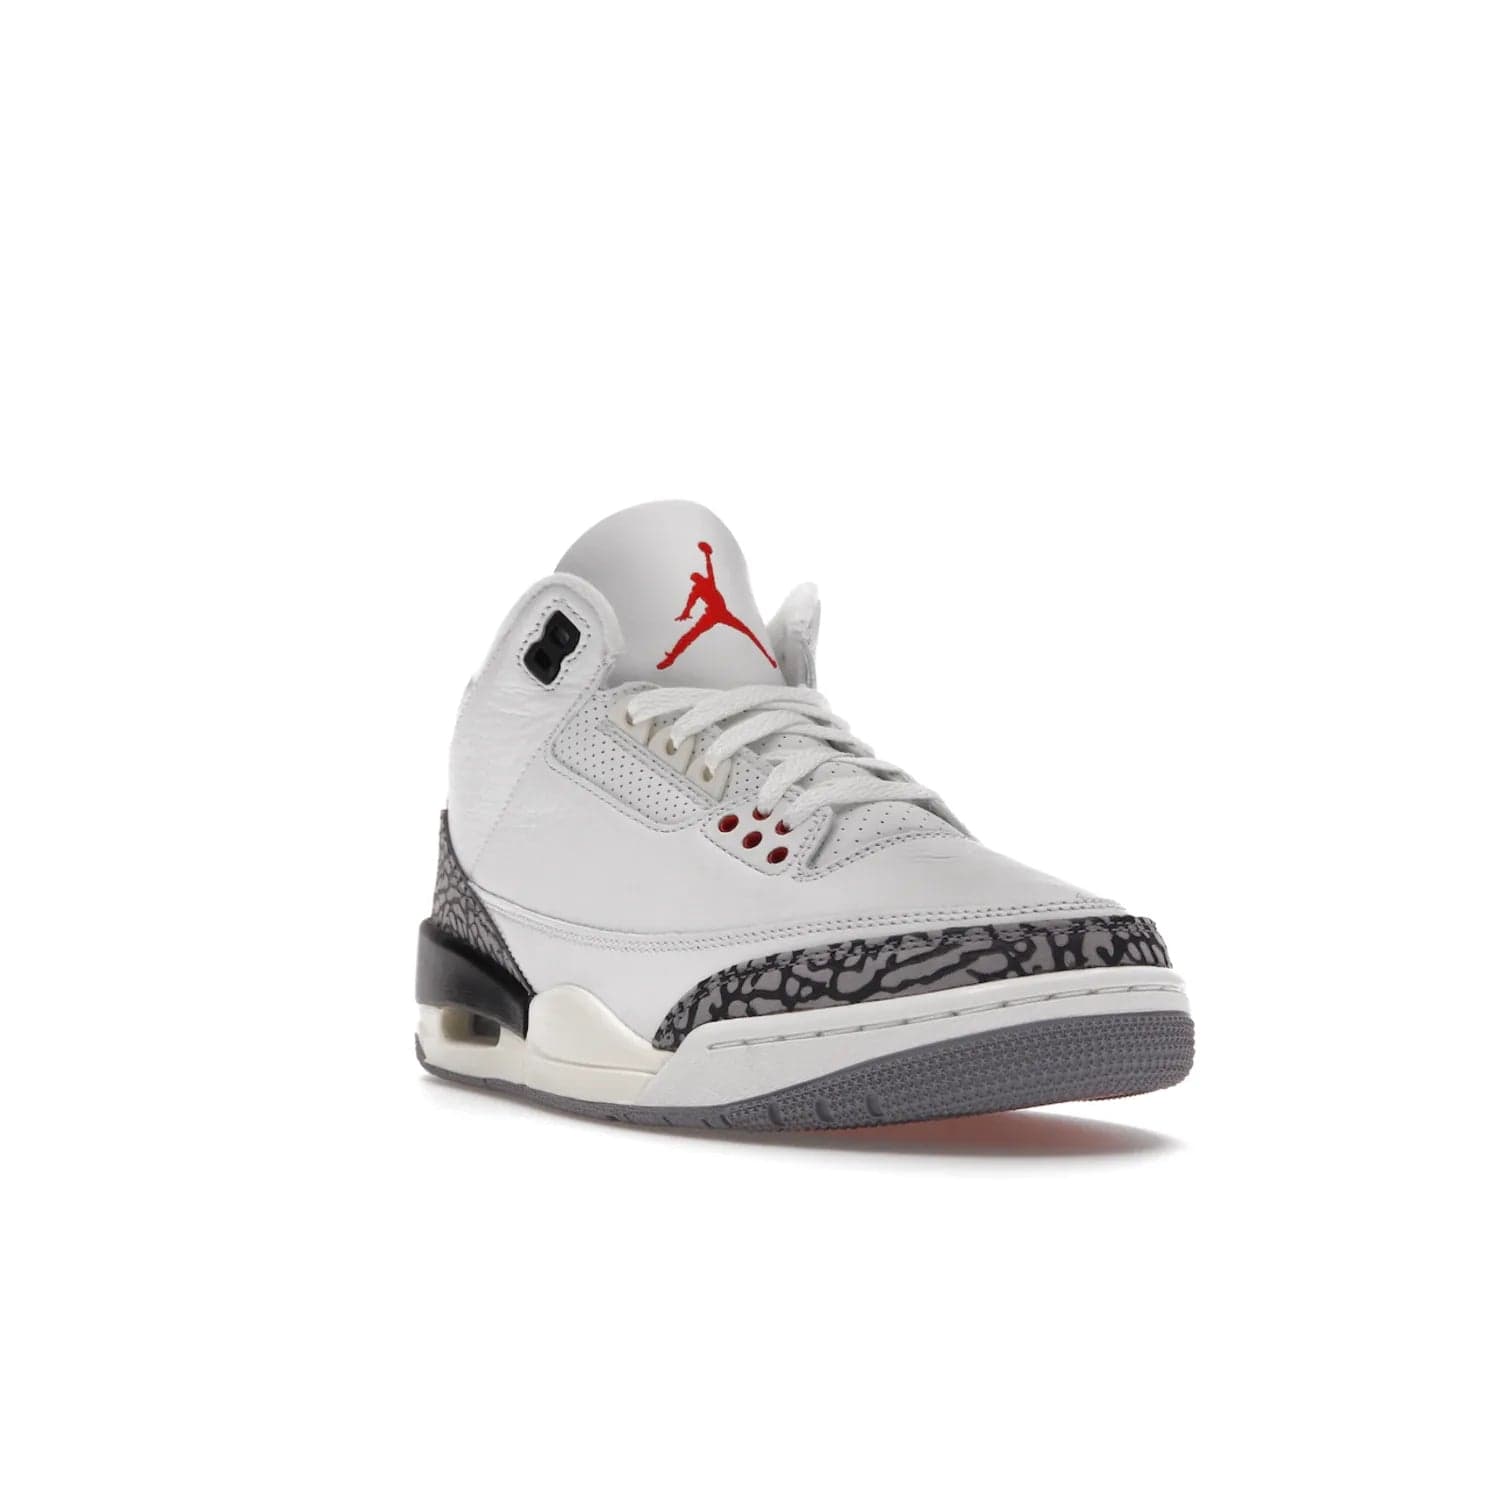 Jordan 3 Retro White Cement Reimagined - Image 7 - Only at www.BallersClubKickz.com - The Reimagined Air Jordan 3 Retro in a Summit White/Fire Red/Black/Cement Grey colorway is launching on March 11, 2023. Featuring a white leather upper, off-white midsoles and heel tabs, this vintage-look sneaker is a must-have.